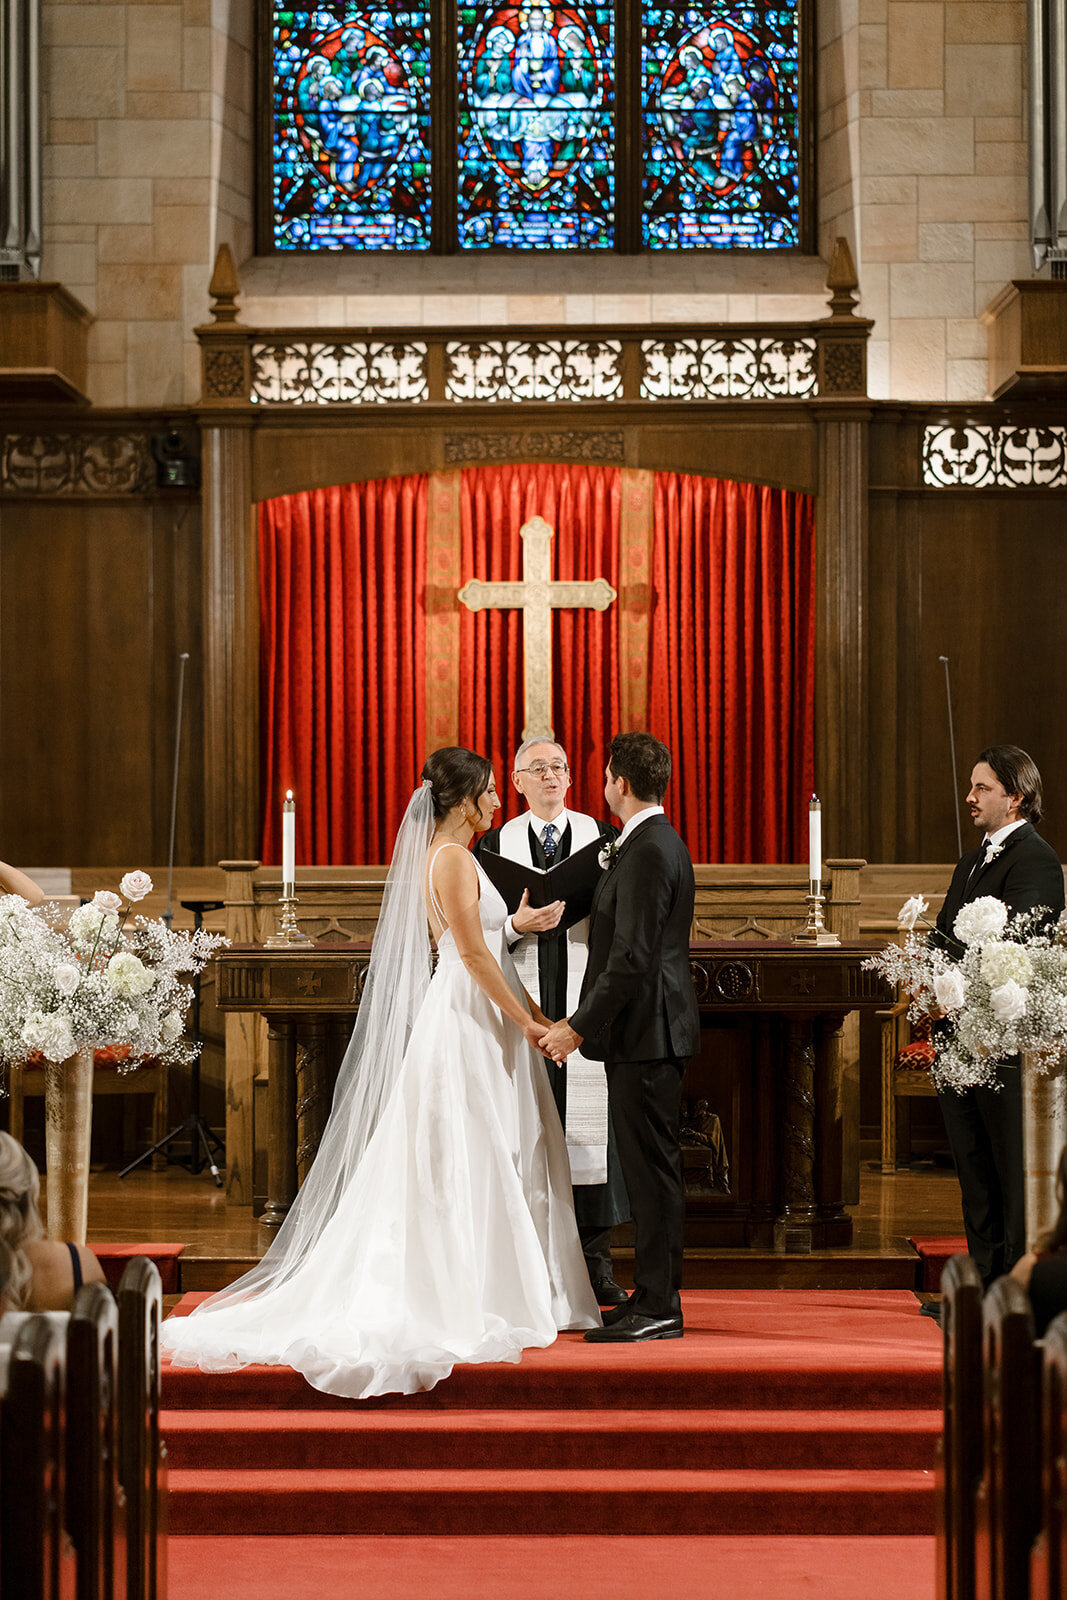 Kylie and Jack at The Grand Hall - Kansas City Wedding Photograpy - Nick and Lexie Photo Film-658